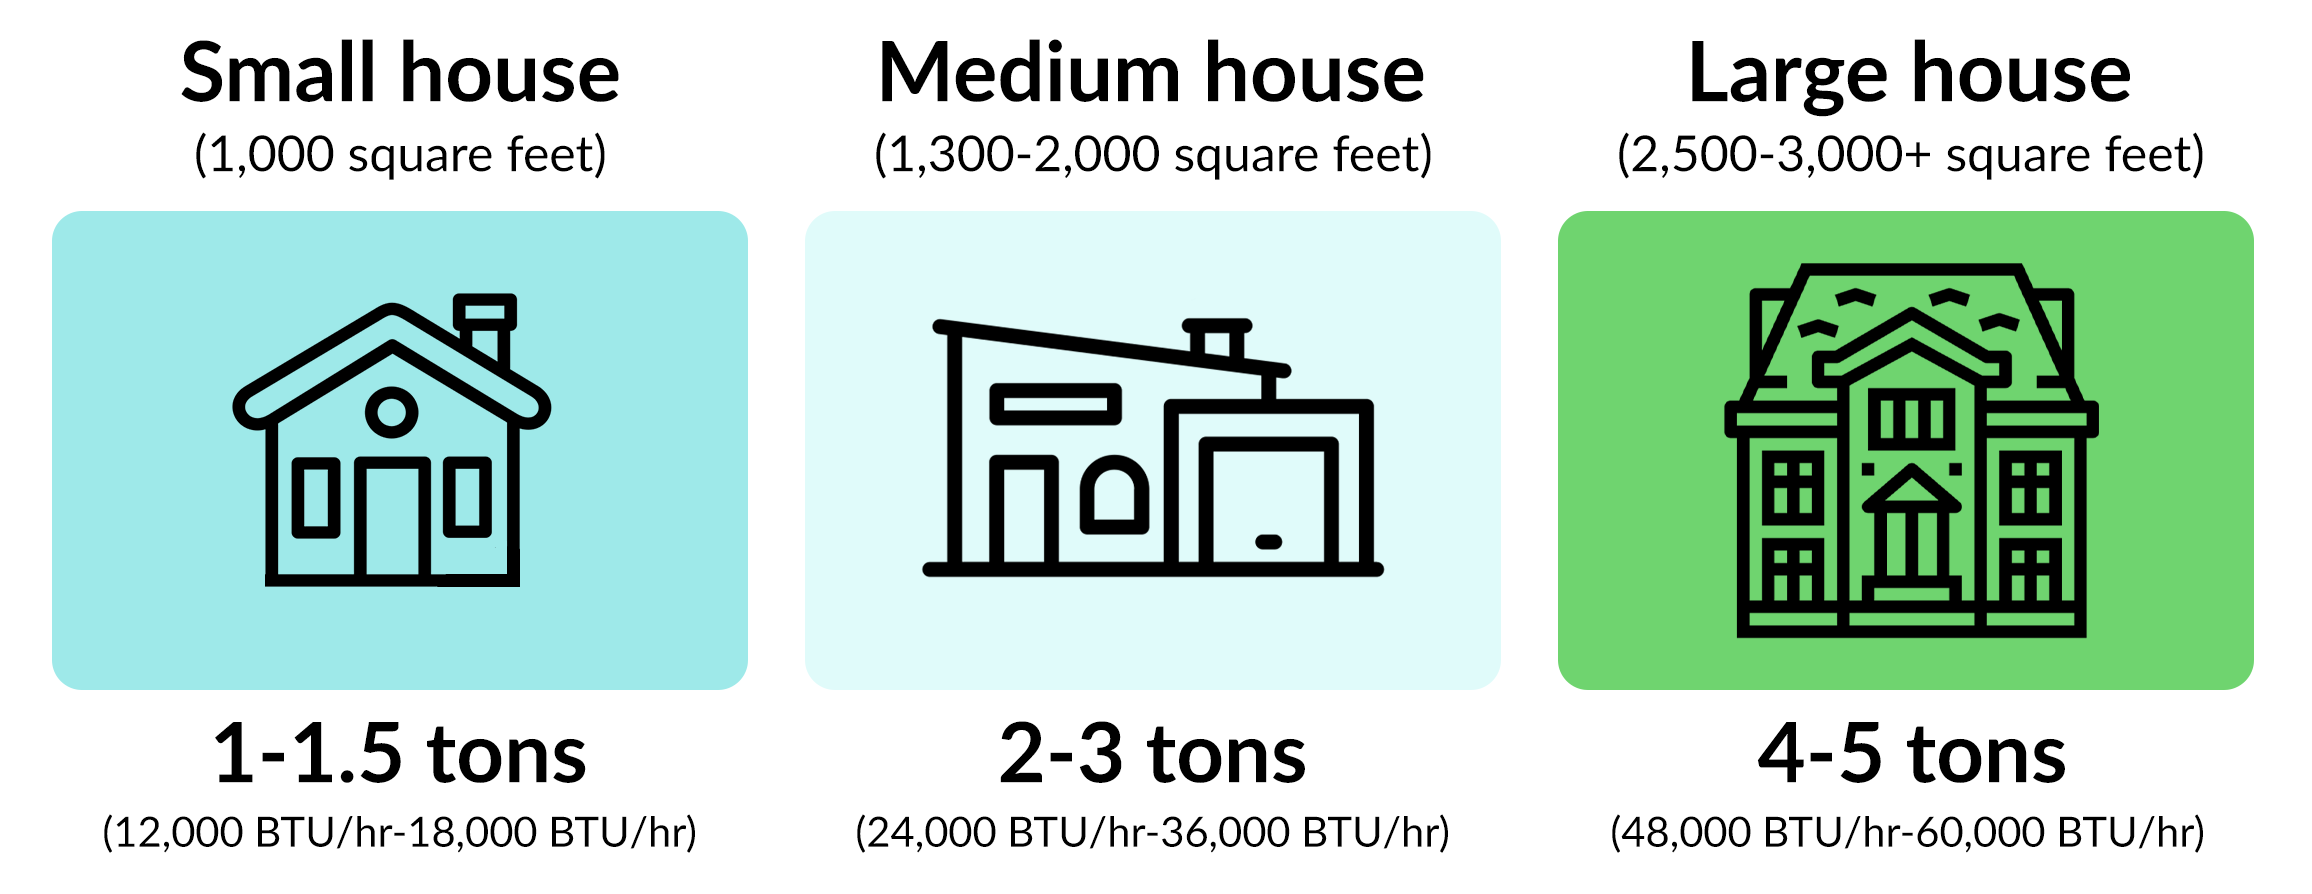 Small house, medium house, large house with square footage and BTUs